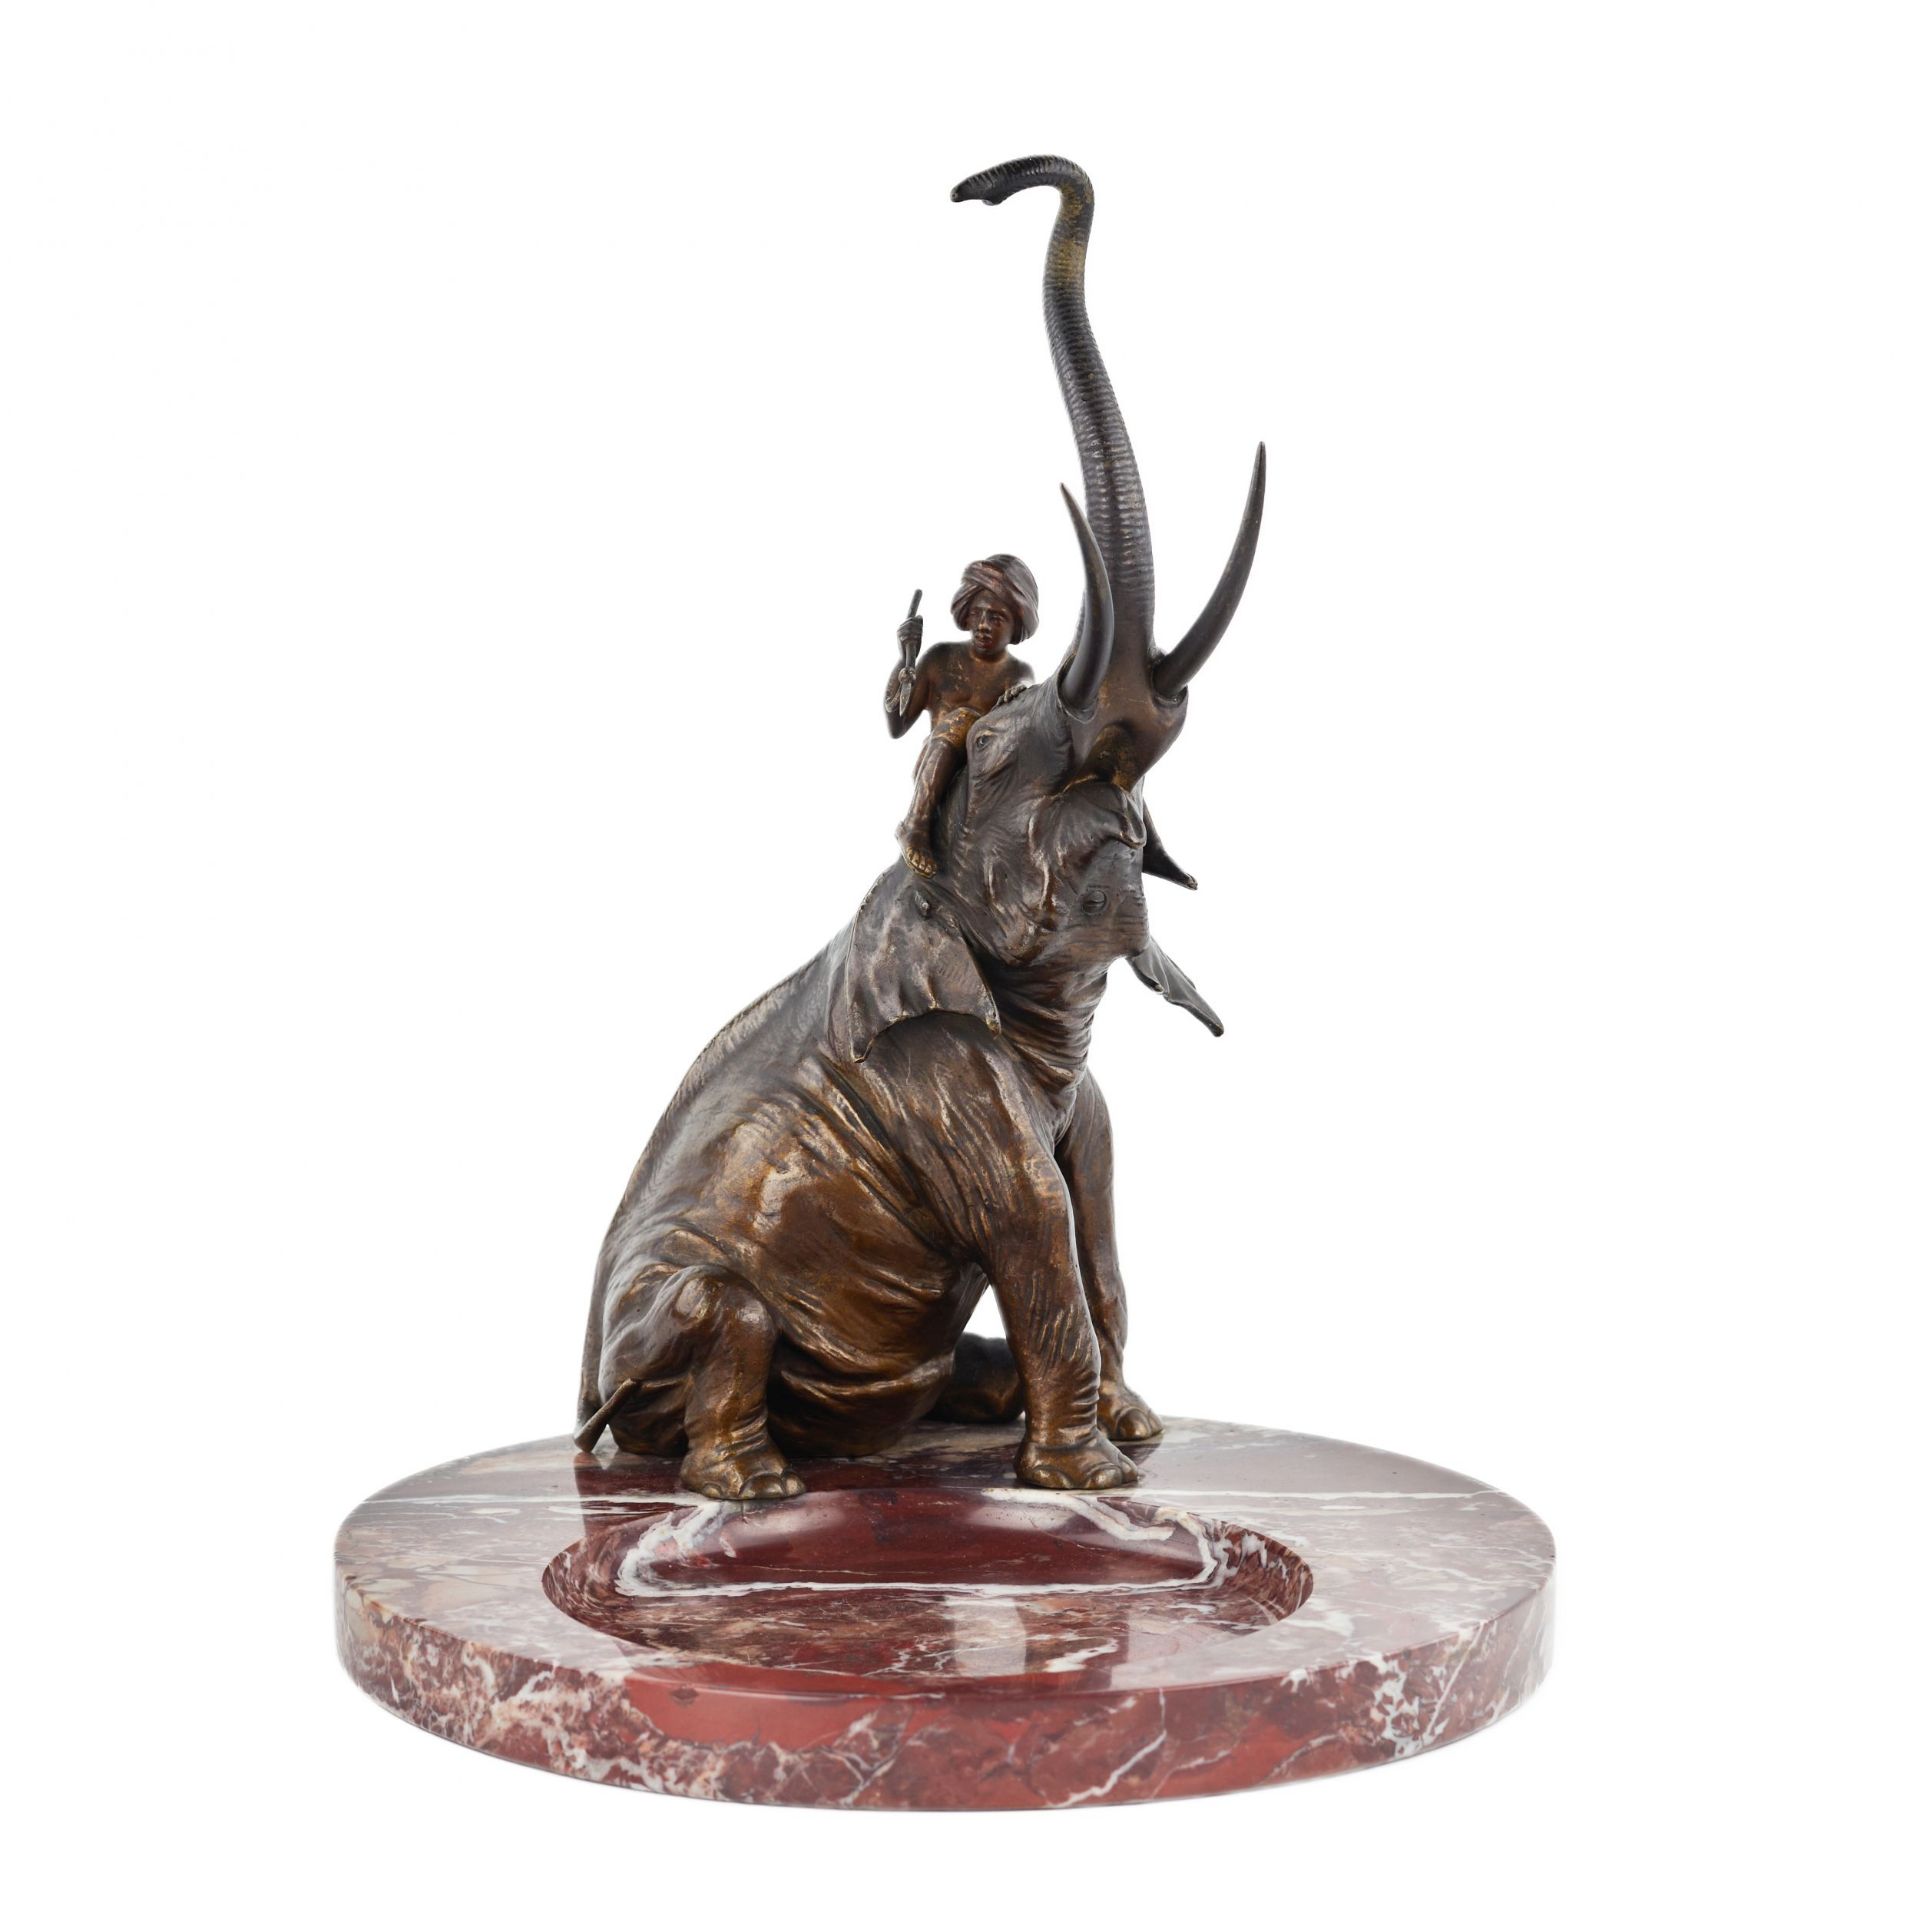 Franz Bergman. Decorative dish for small items made of marble, with a bronze figure of an elephant. - Bild 2 aus 5